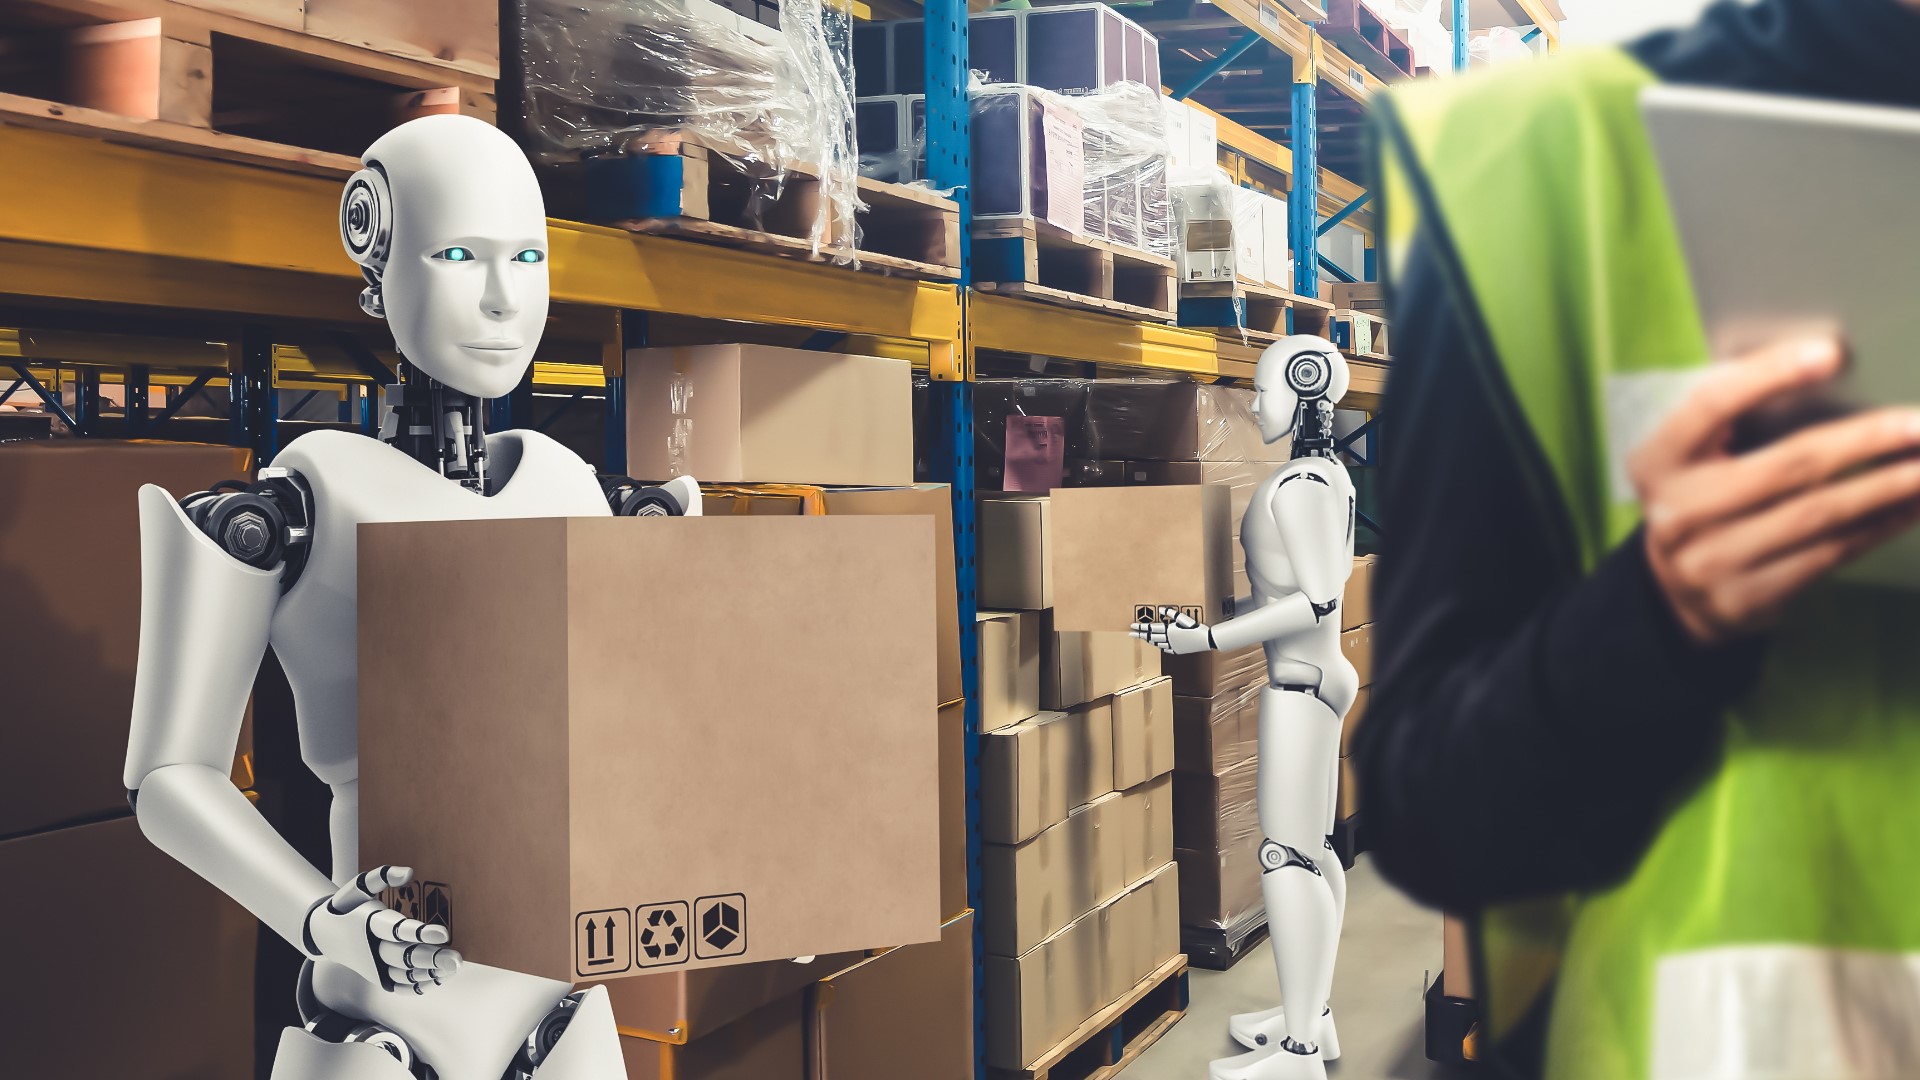 The robots are coming: Automation taking more jobs from people |